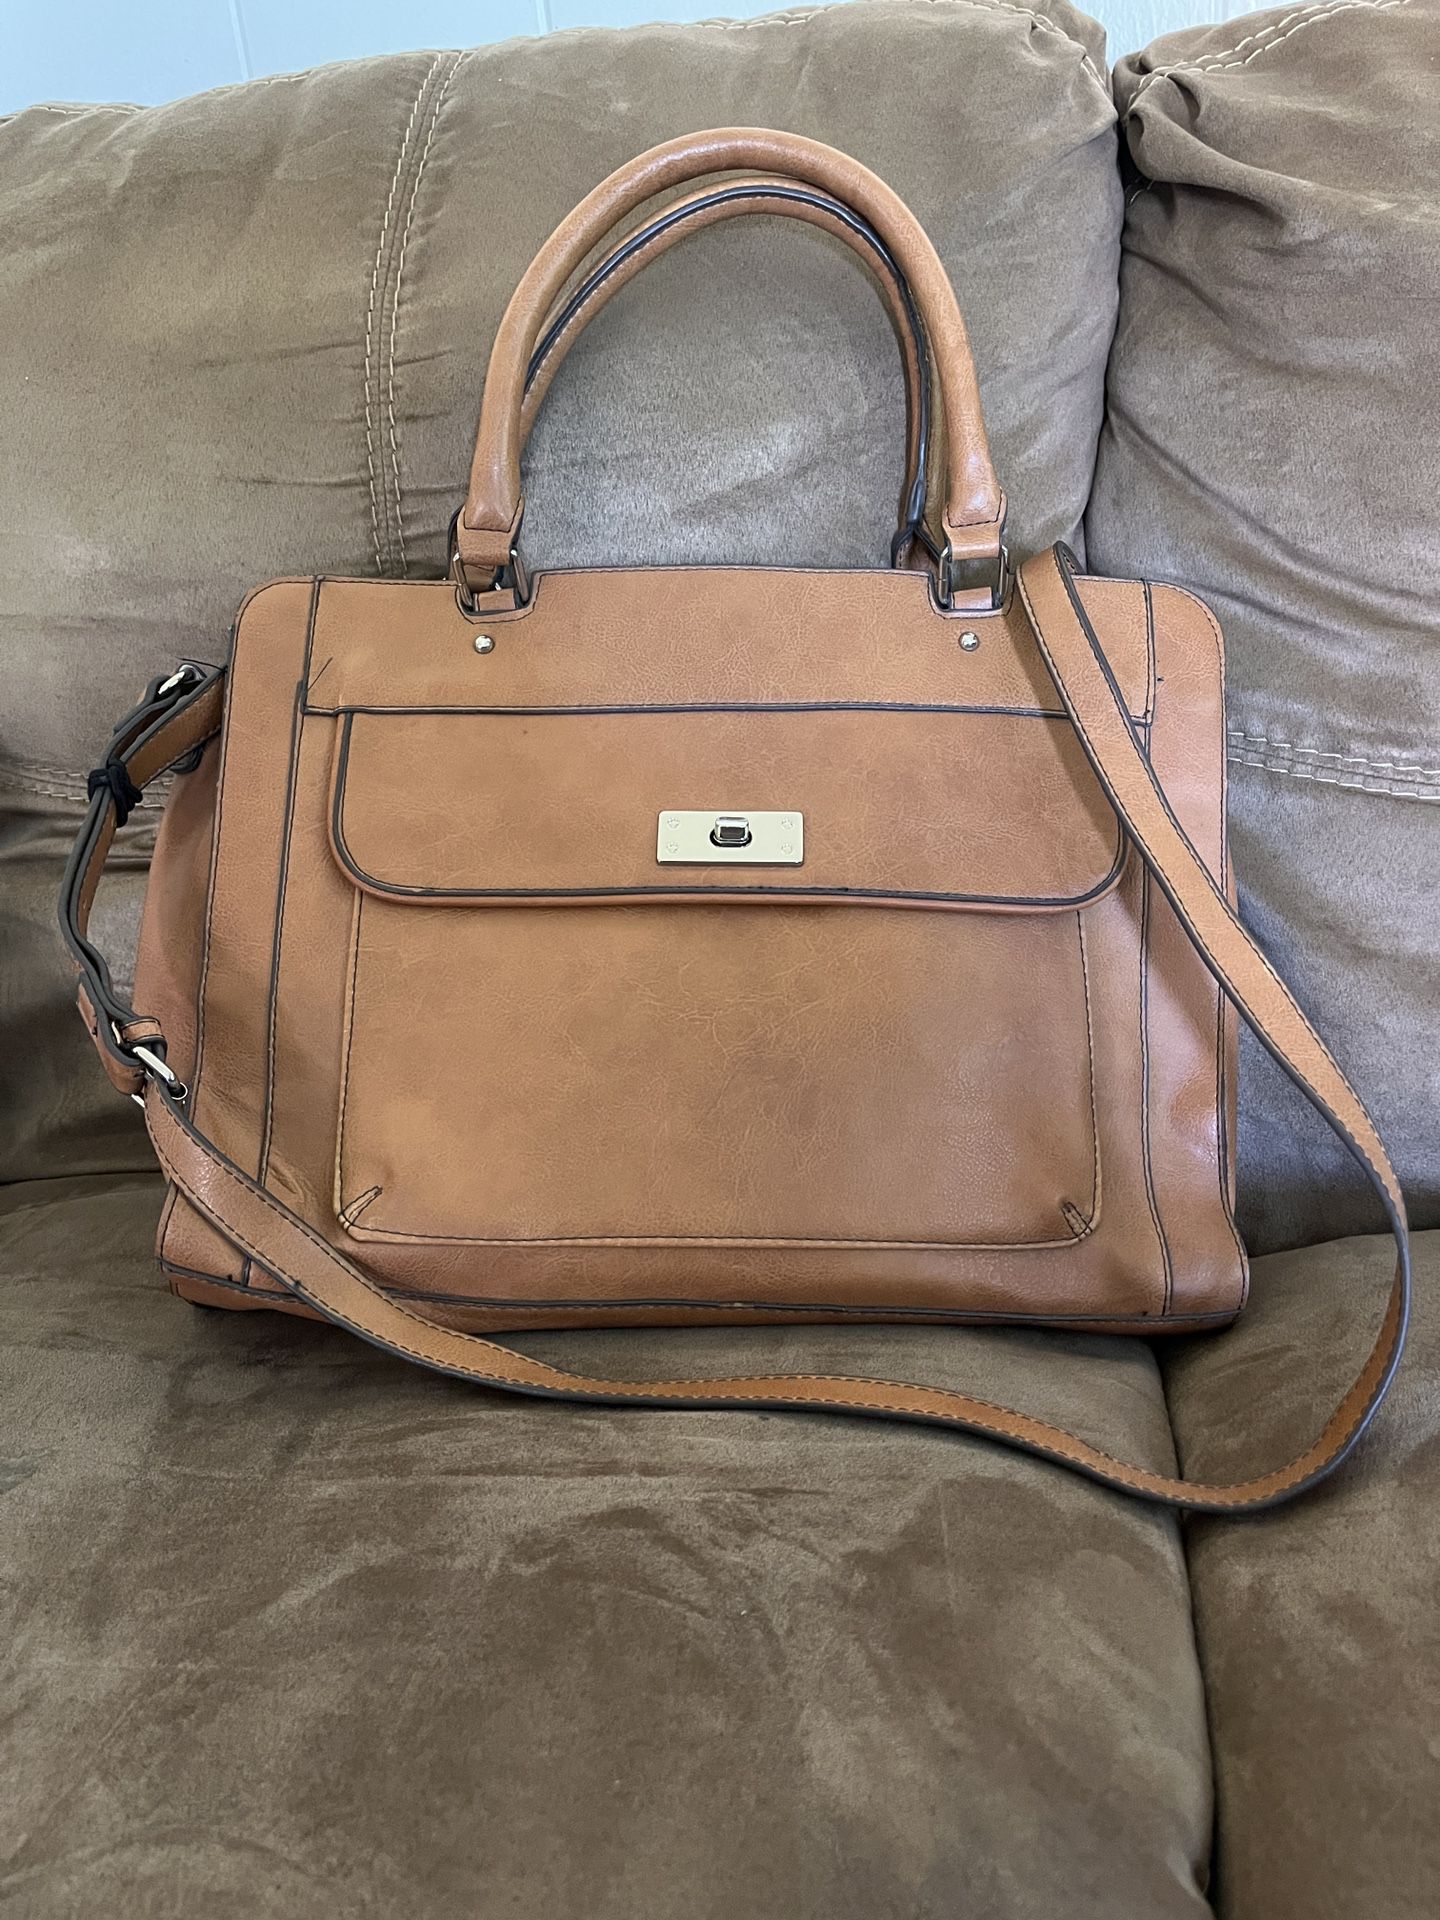 Leather Satchel With Strap